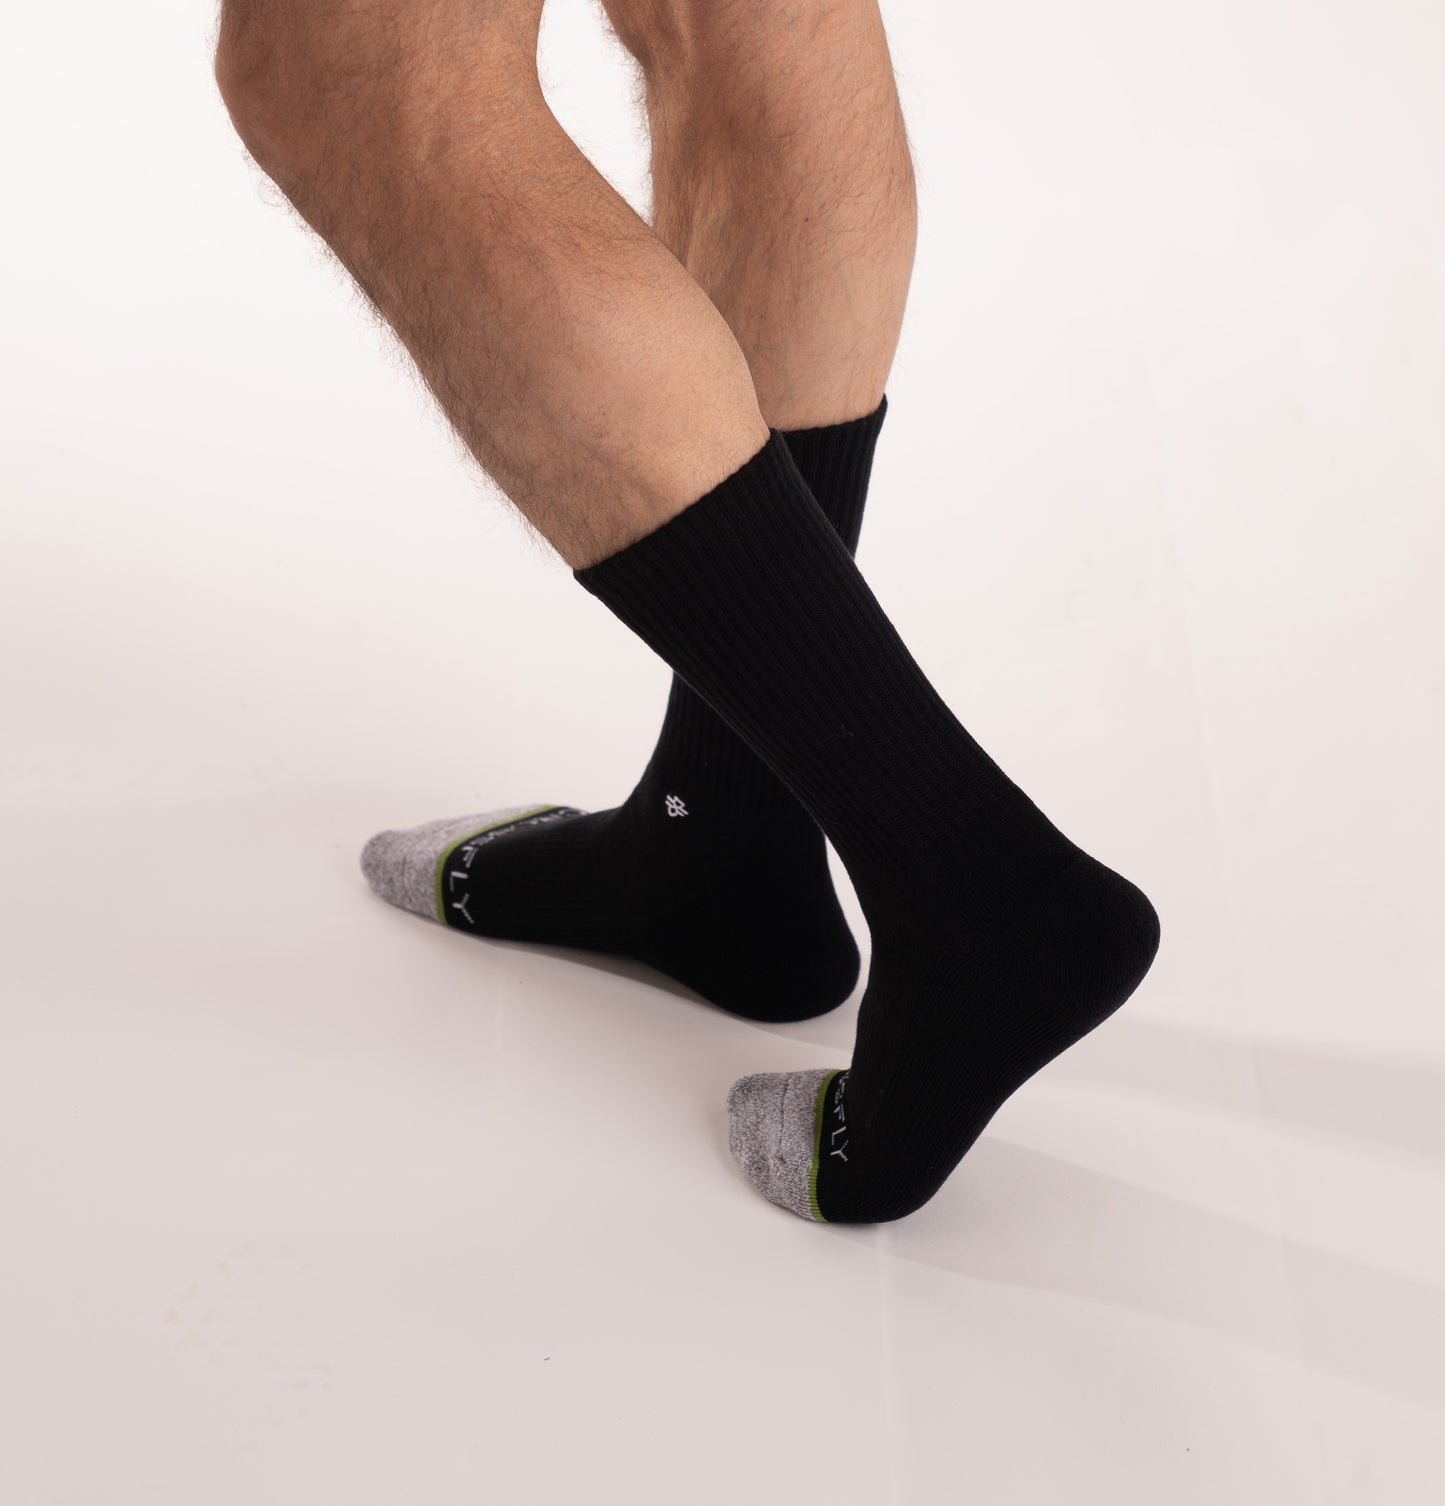 Crossfly men's Original Crew Socks in black from the Everyday series, featuring Flat Toe Seams and 360 Hold.